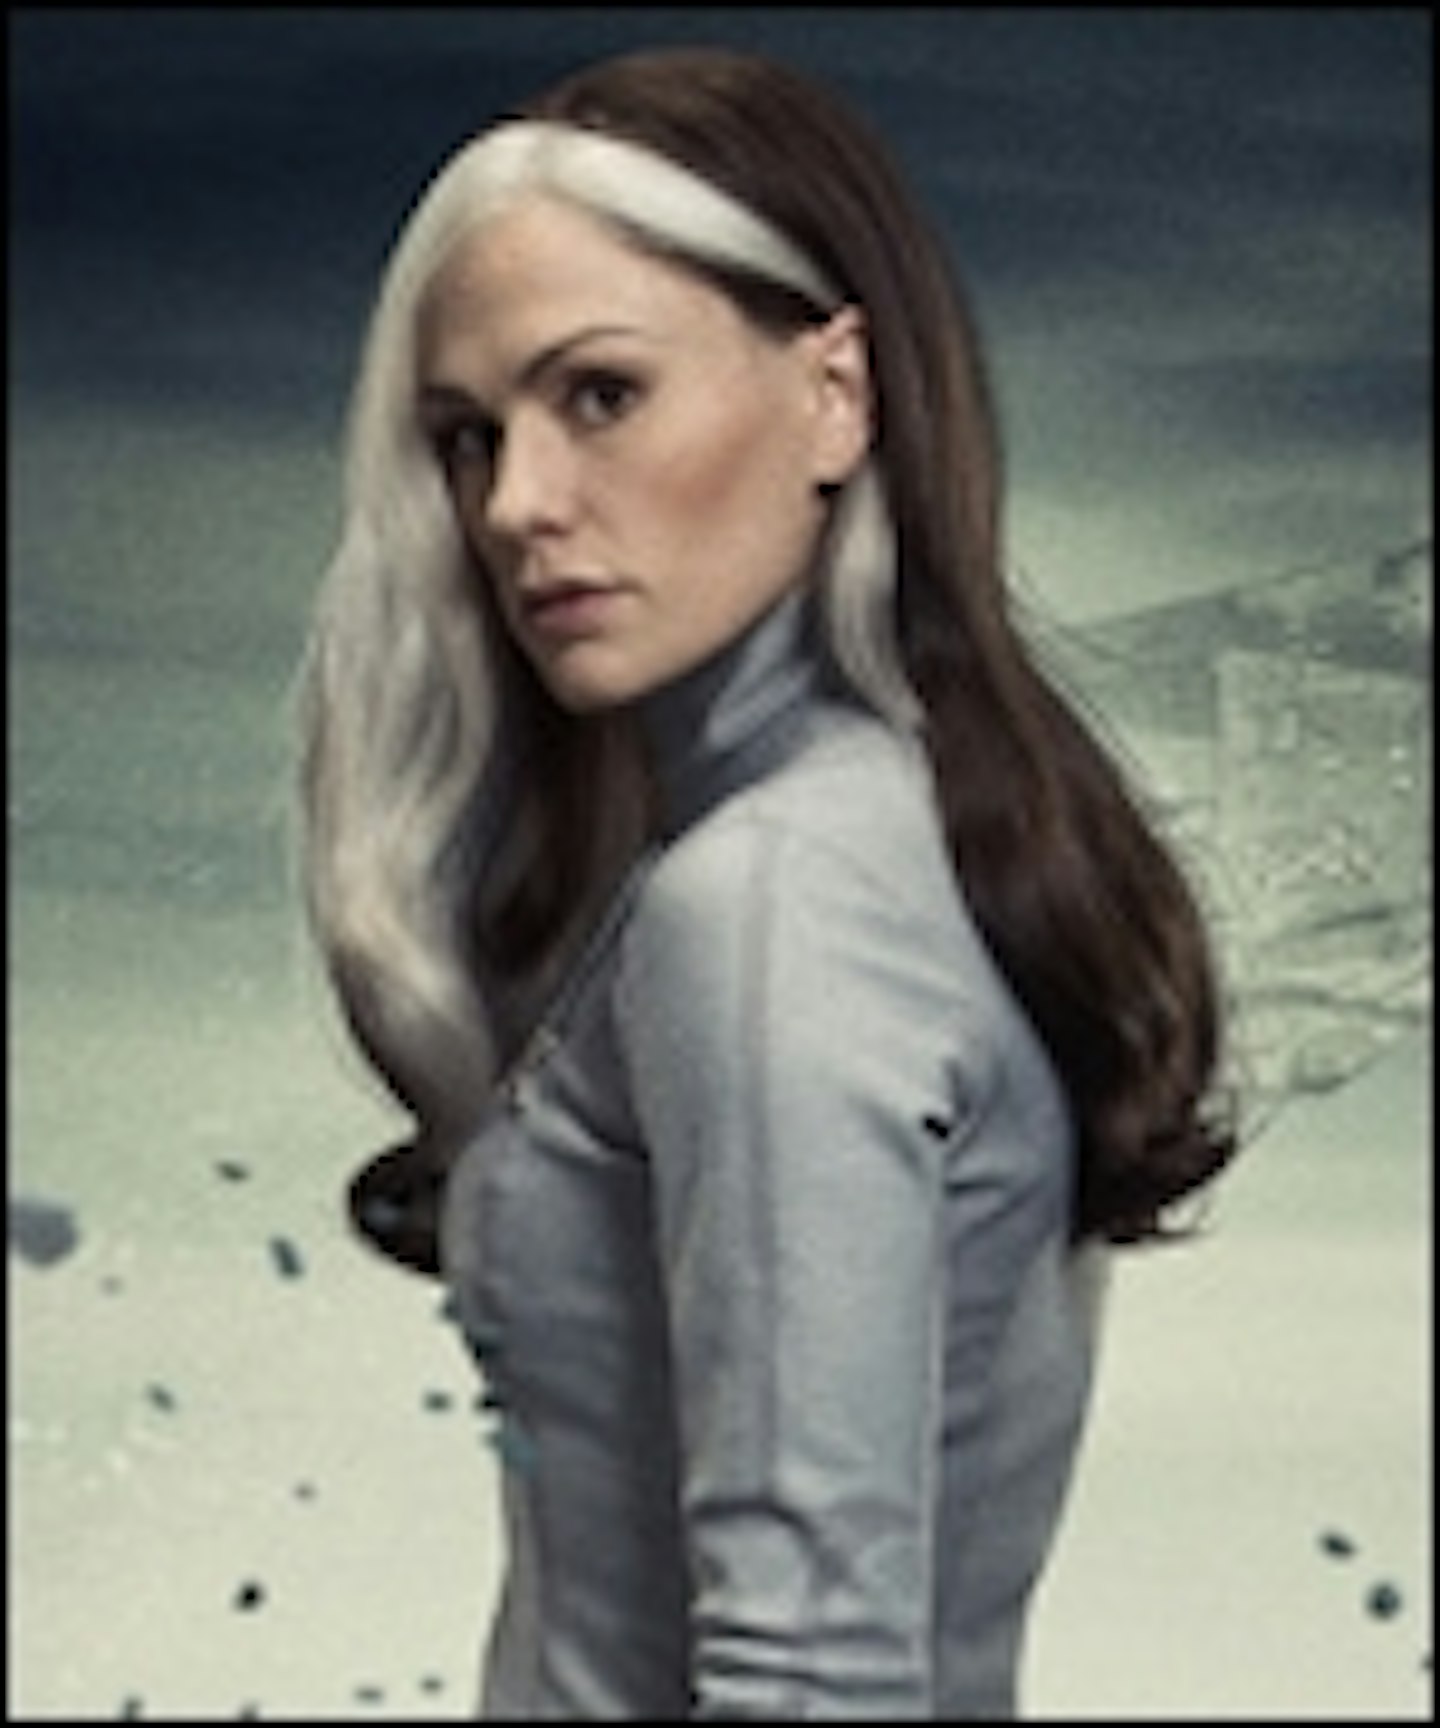 Bryan Singer On Rogue Being Cut From X-Men: Days Of Future Past